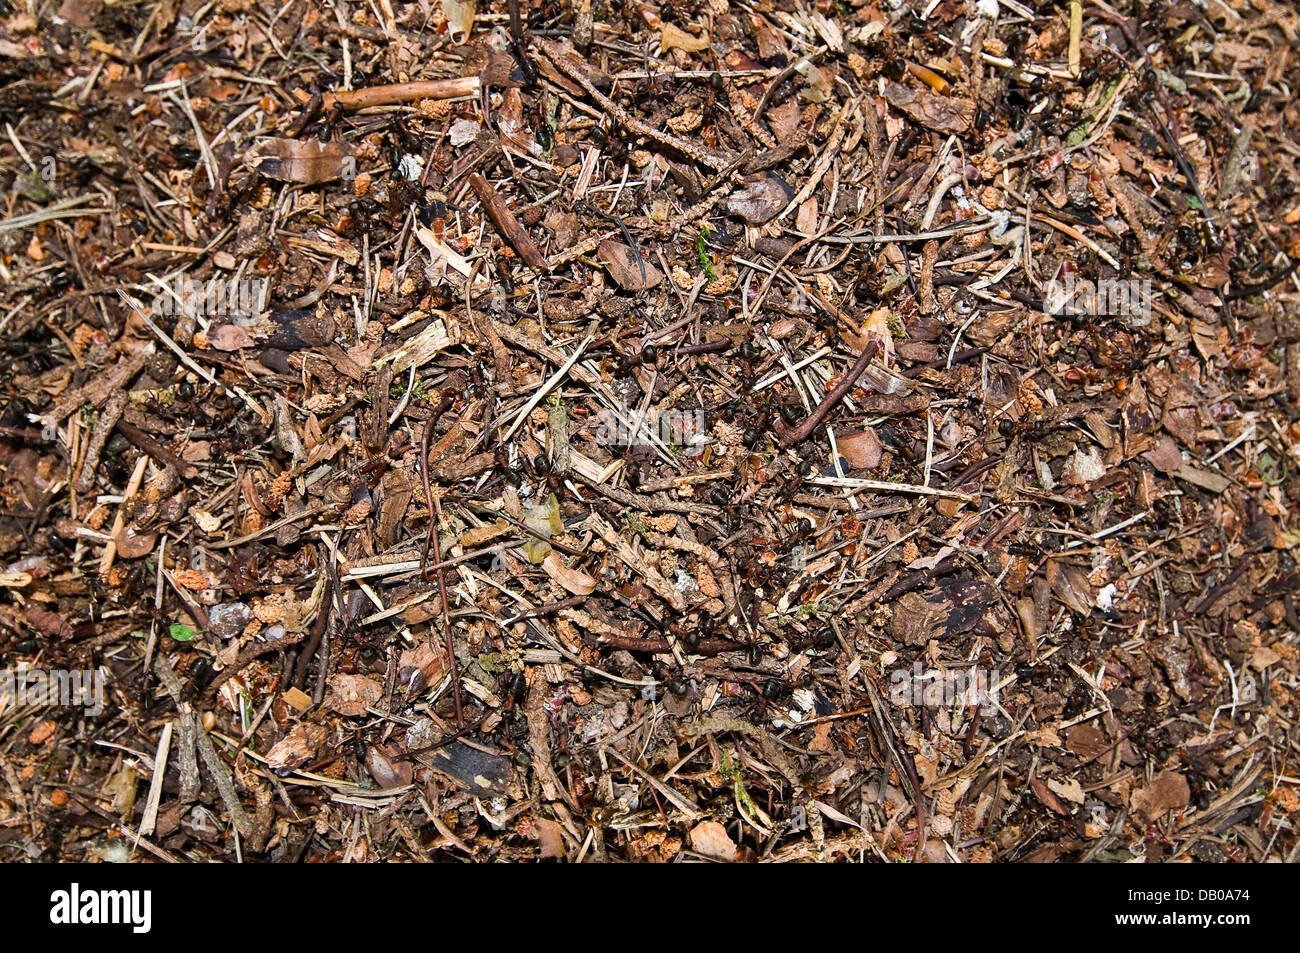 Wood ants swarming over their nest at Sullington Warren, West Sussex, UK Stock Photo